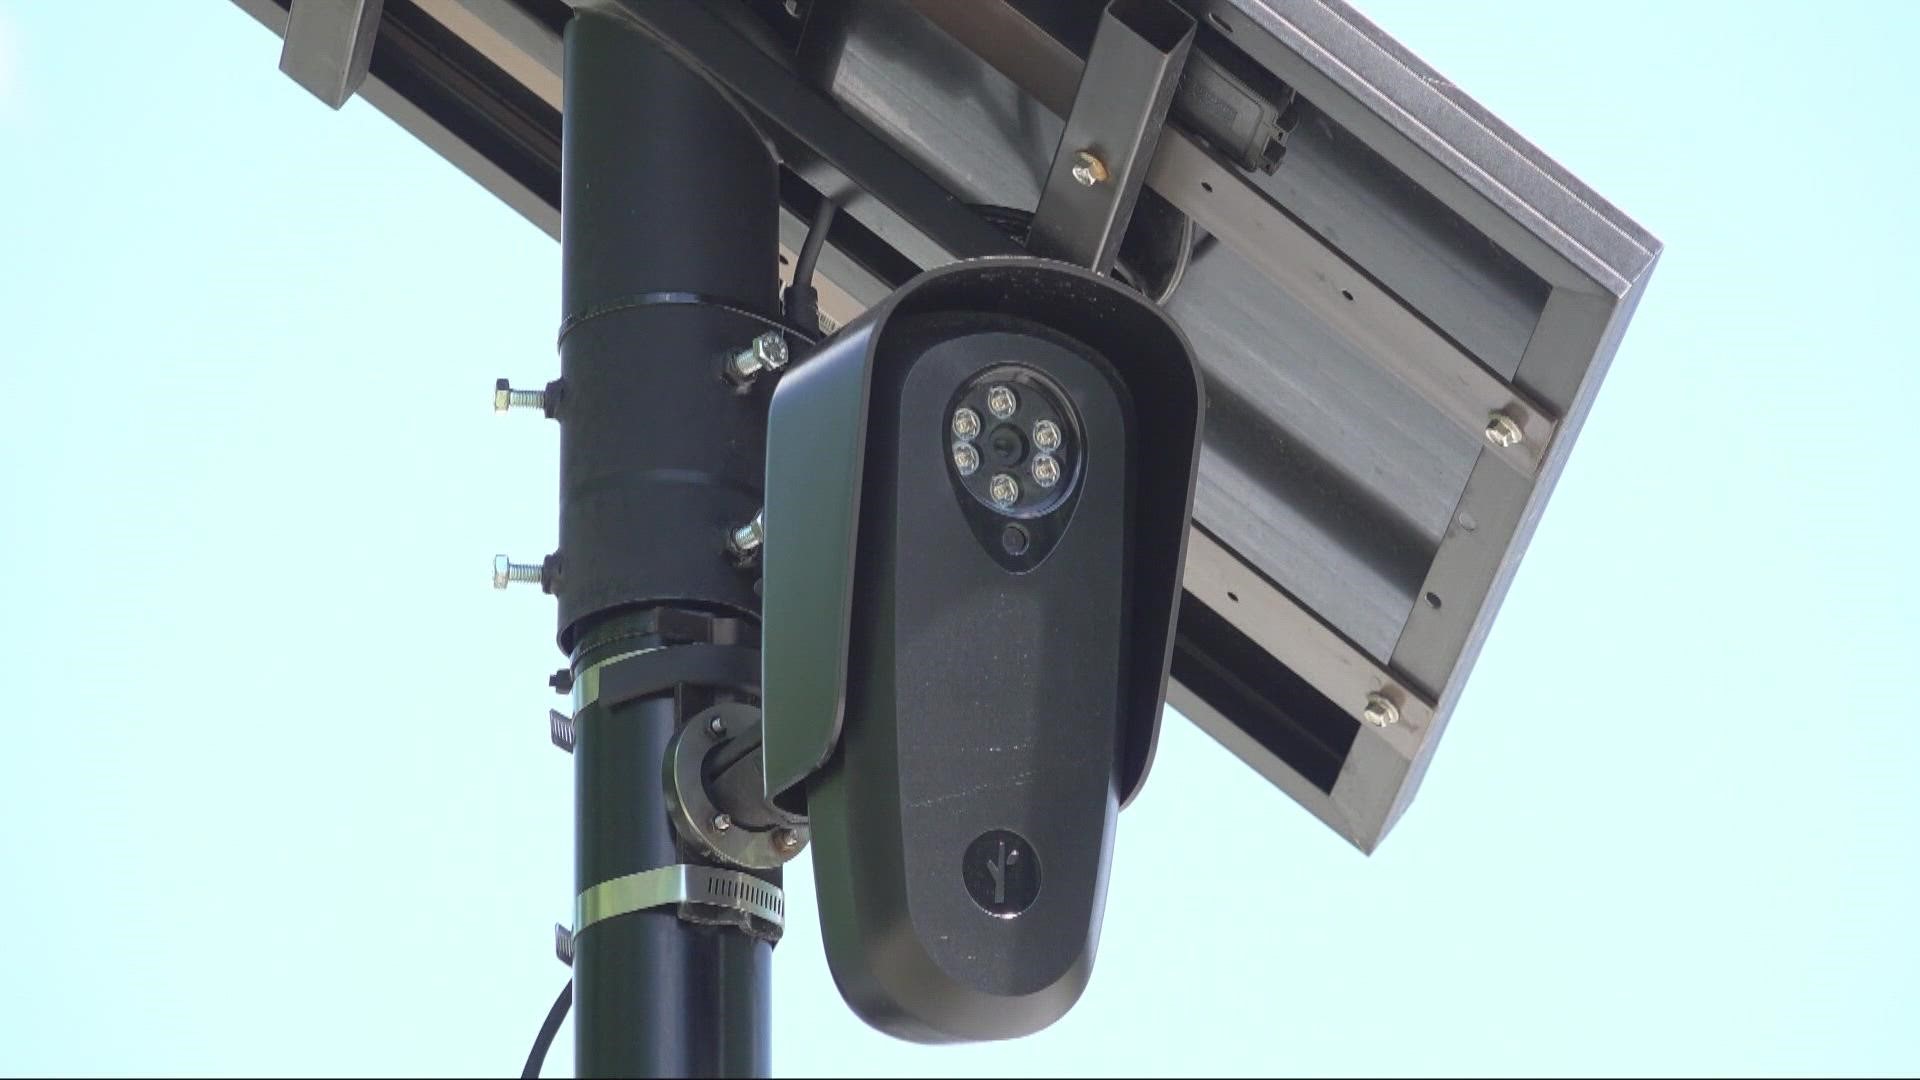 Beachwood announced Friday there are now 31 license plate readers installed throughout the city with two mobile units in patrol vehicles.